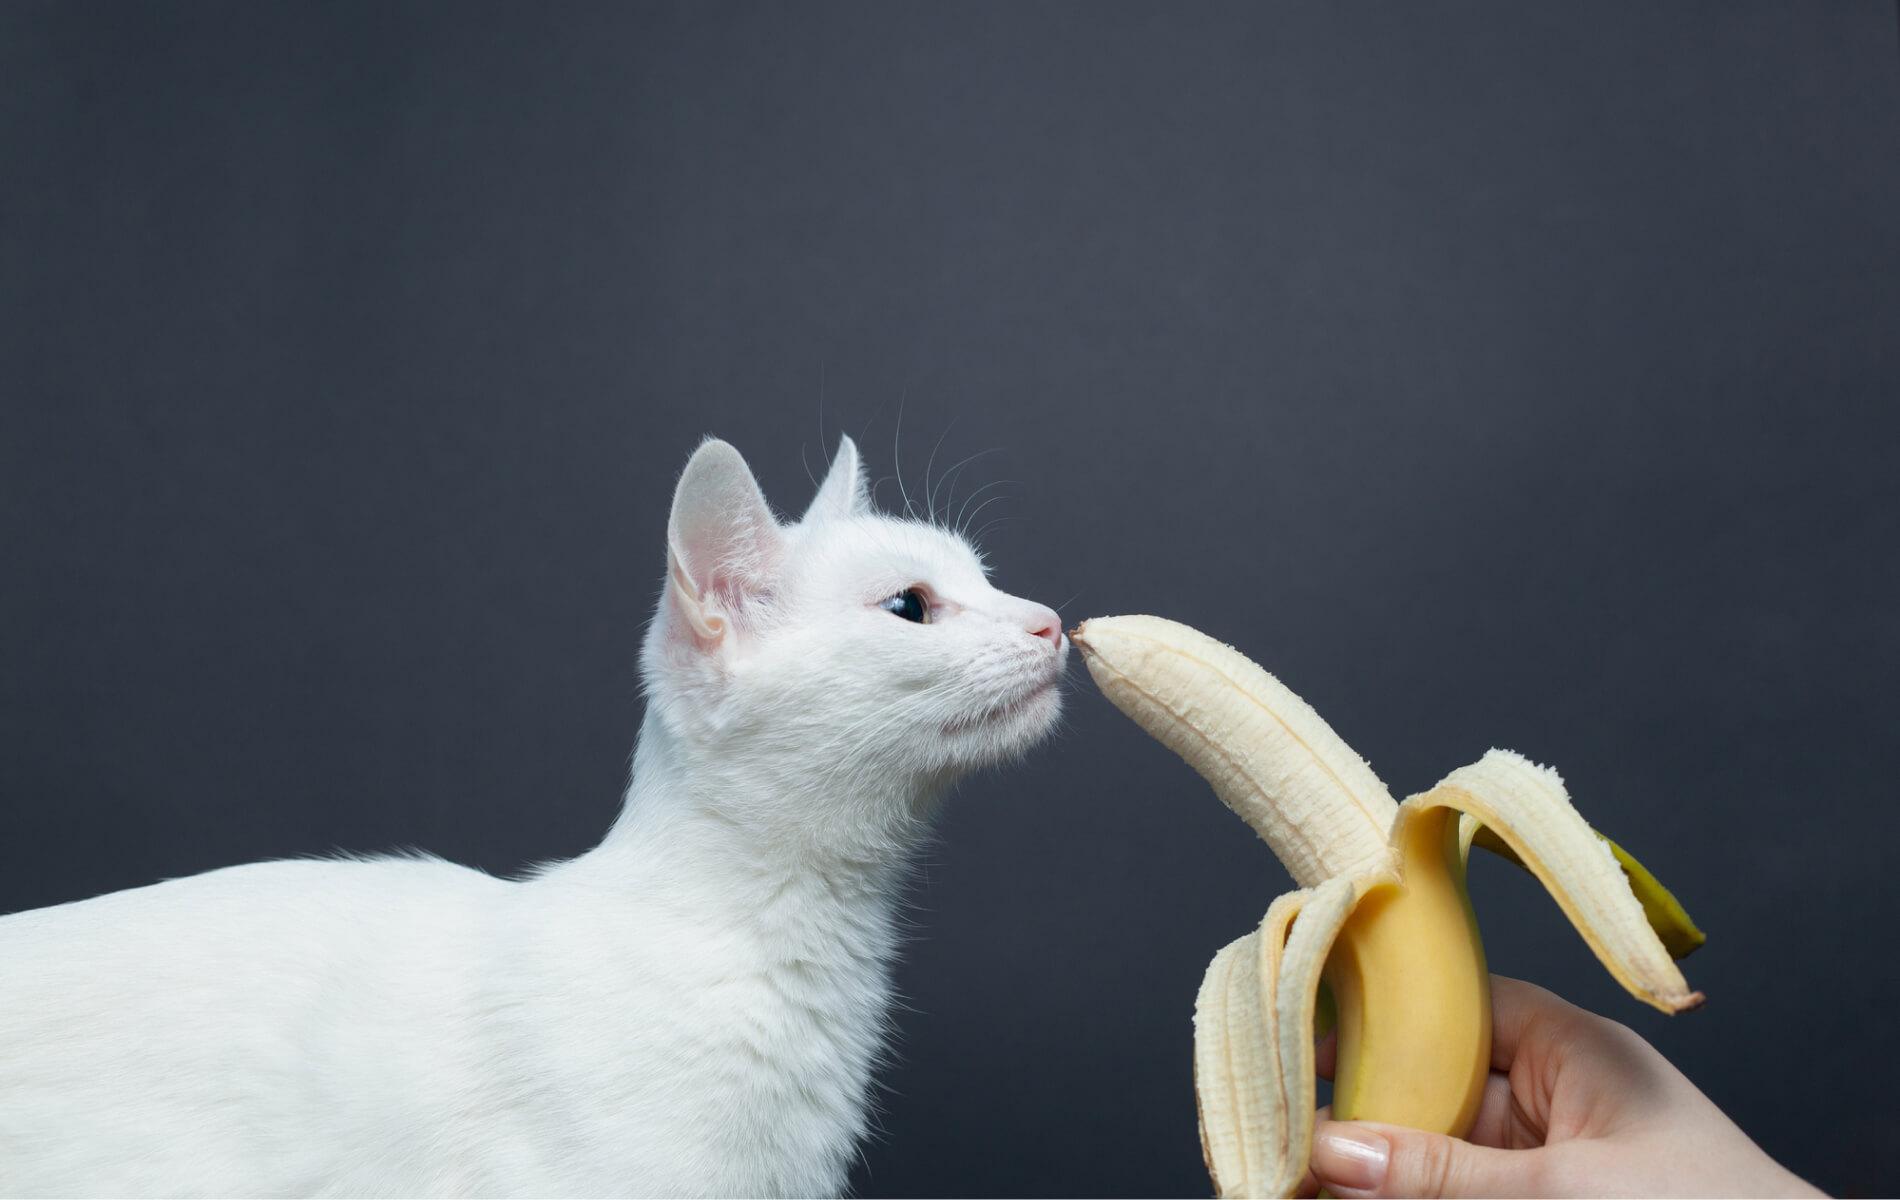 Are cats allowed to eat bananas?